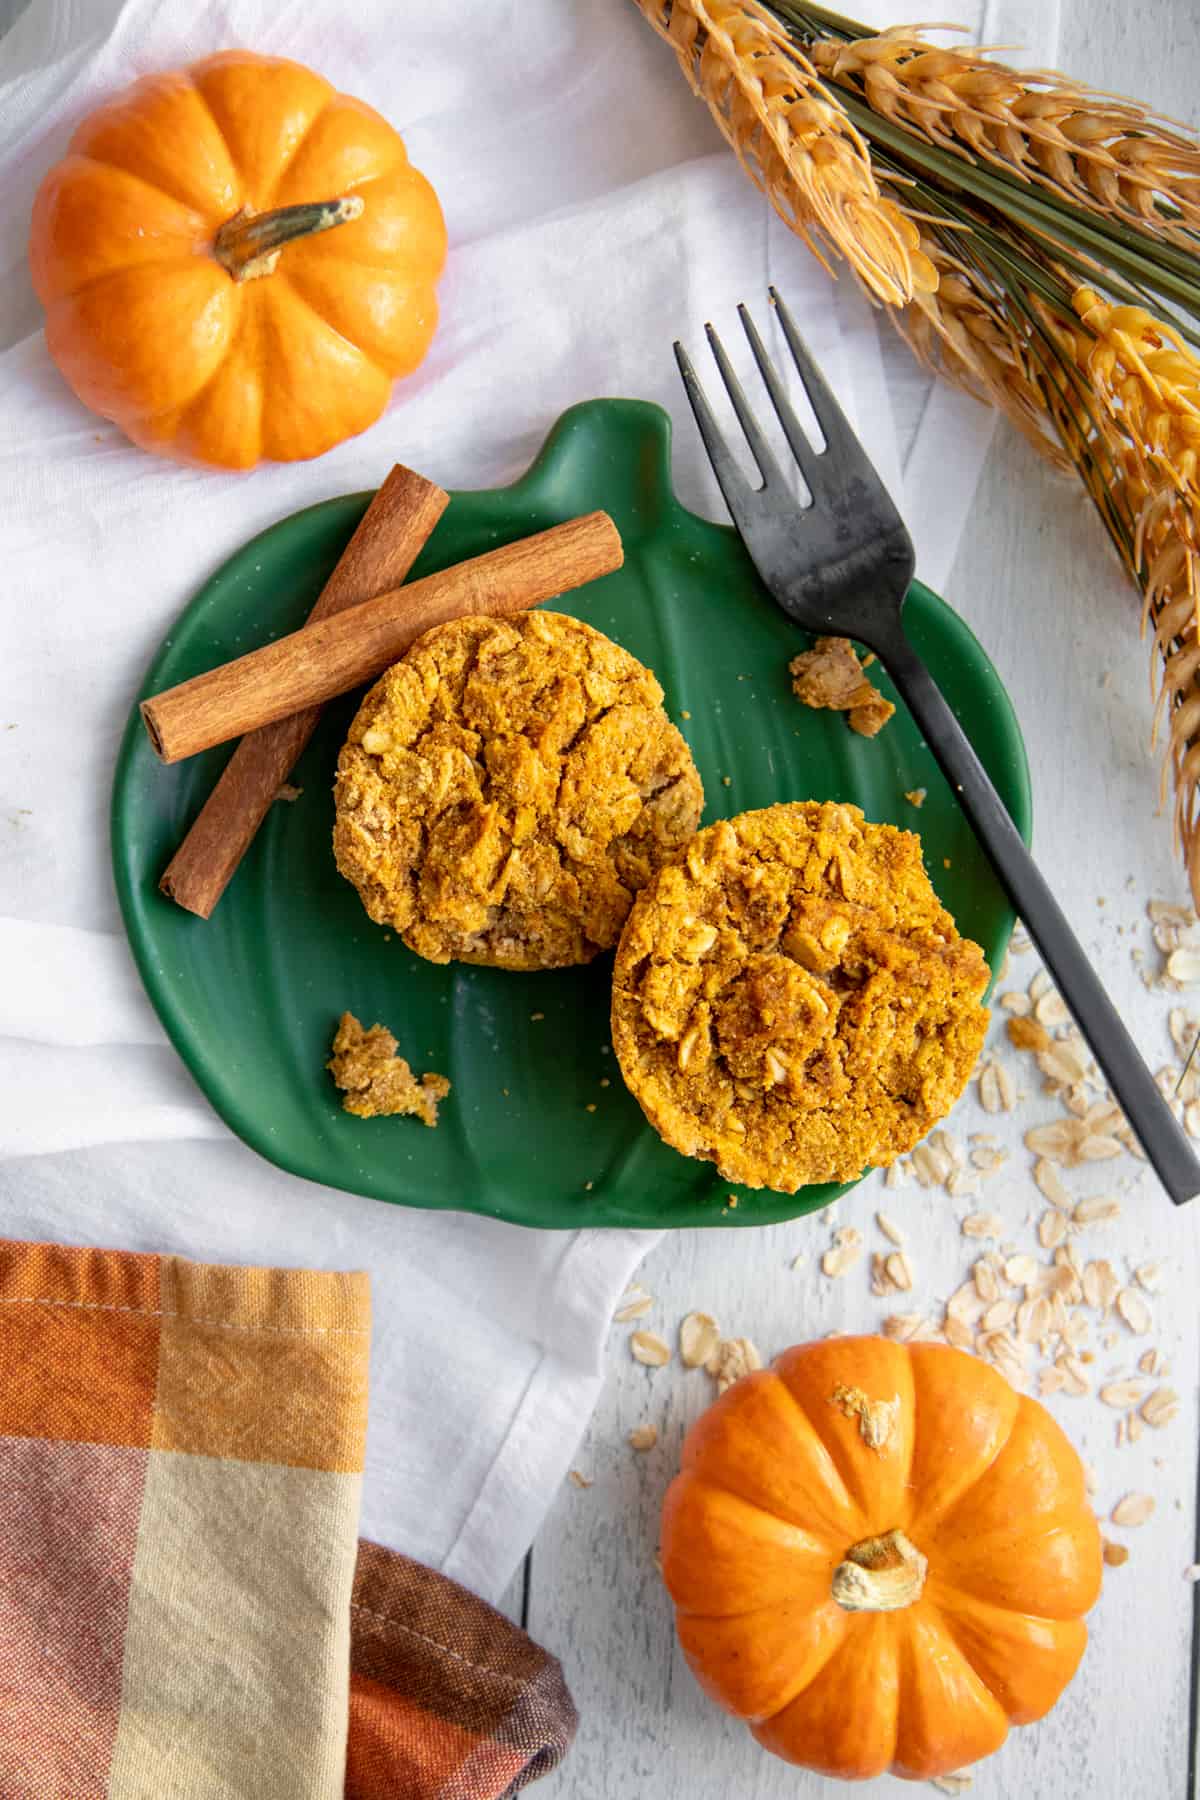 Two Pumpkin Spice Baked Oatmeal Cups on a green plate with cinnamon sticks